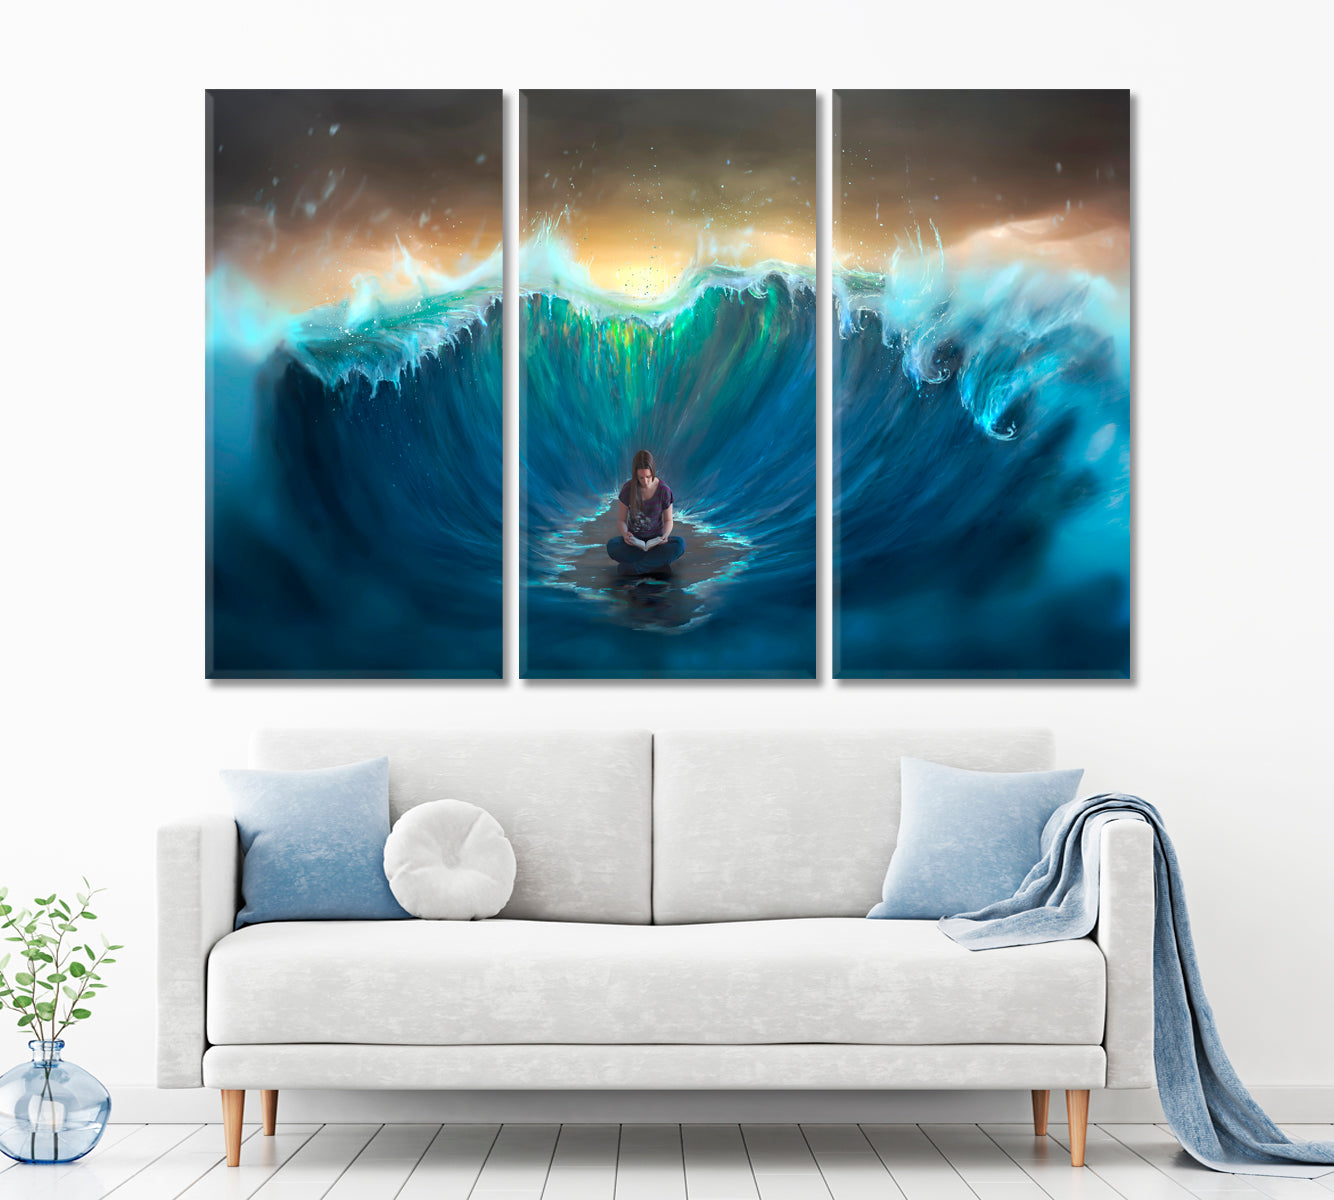 Woman Surrounded By Sea Waves Motivation Sport Poster Print Decor Artesty 3 panels 36" x 24" 